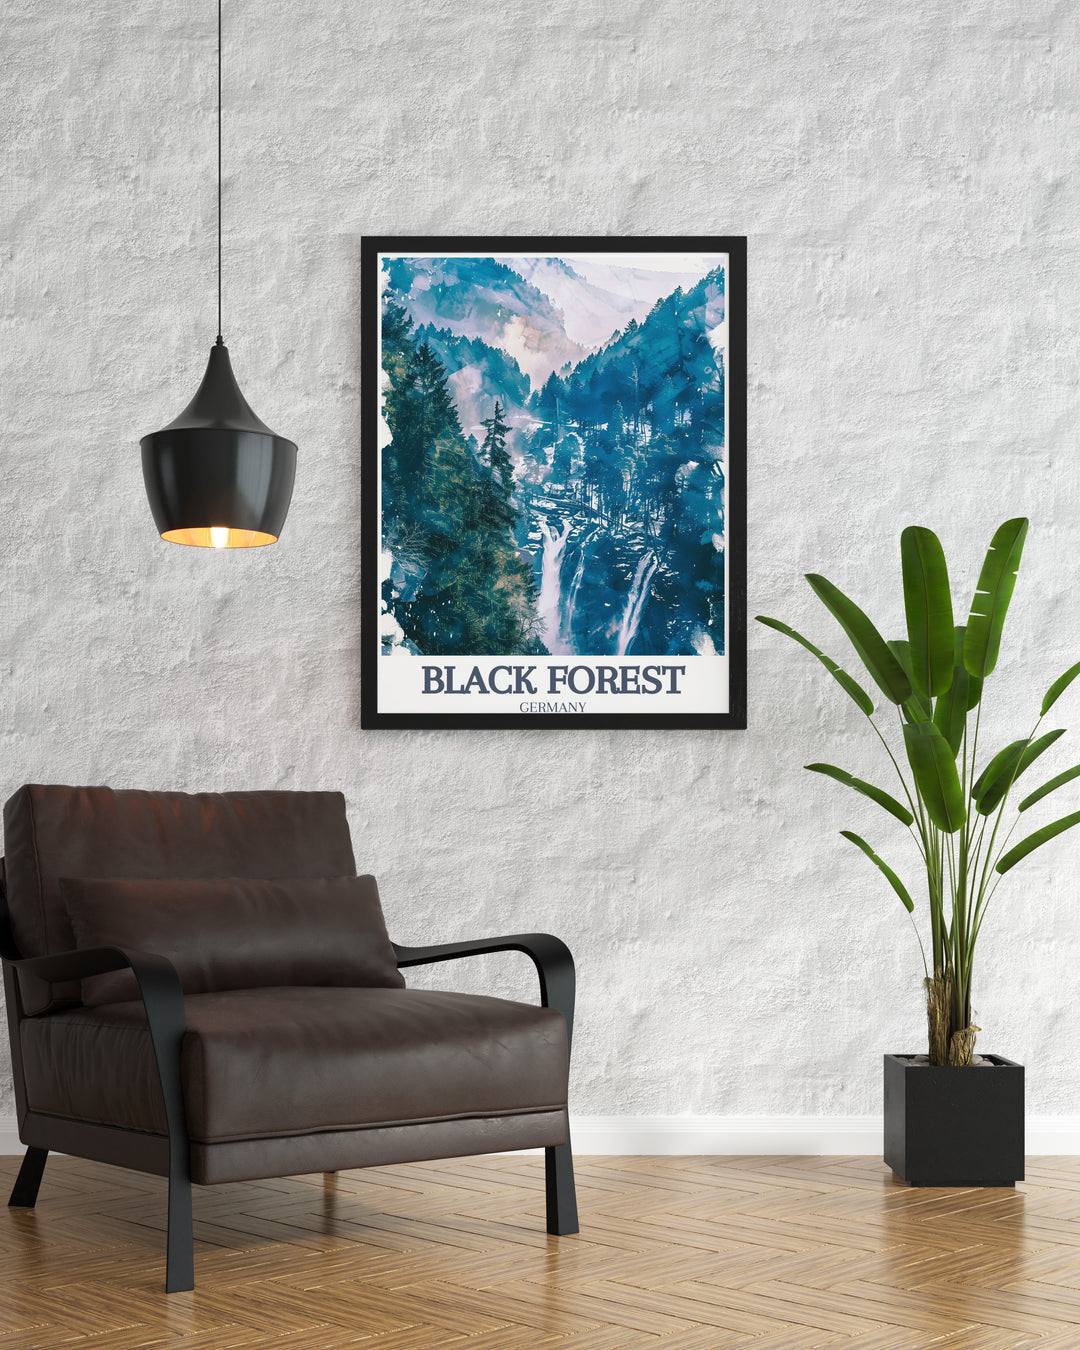 Captivating Black Forest Artwork featuring Triberg Waterfalls, Baden Wurttemberg perfect for transforming living spaces into serene retreats the vibrant colors and intricate details make it an ideal choice for those seeking unique German travel prints and forest inspired home decor